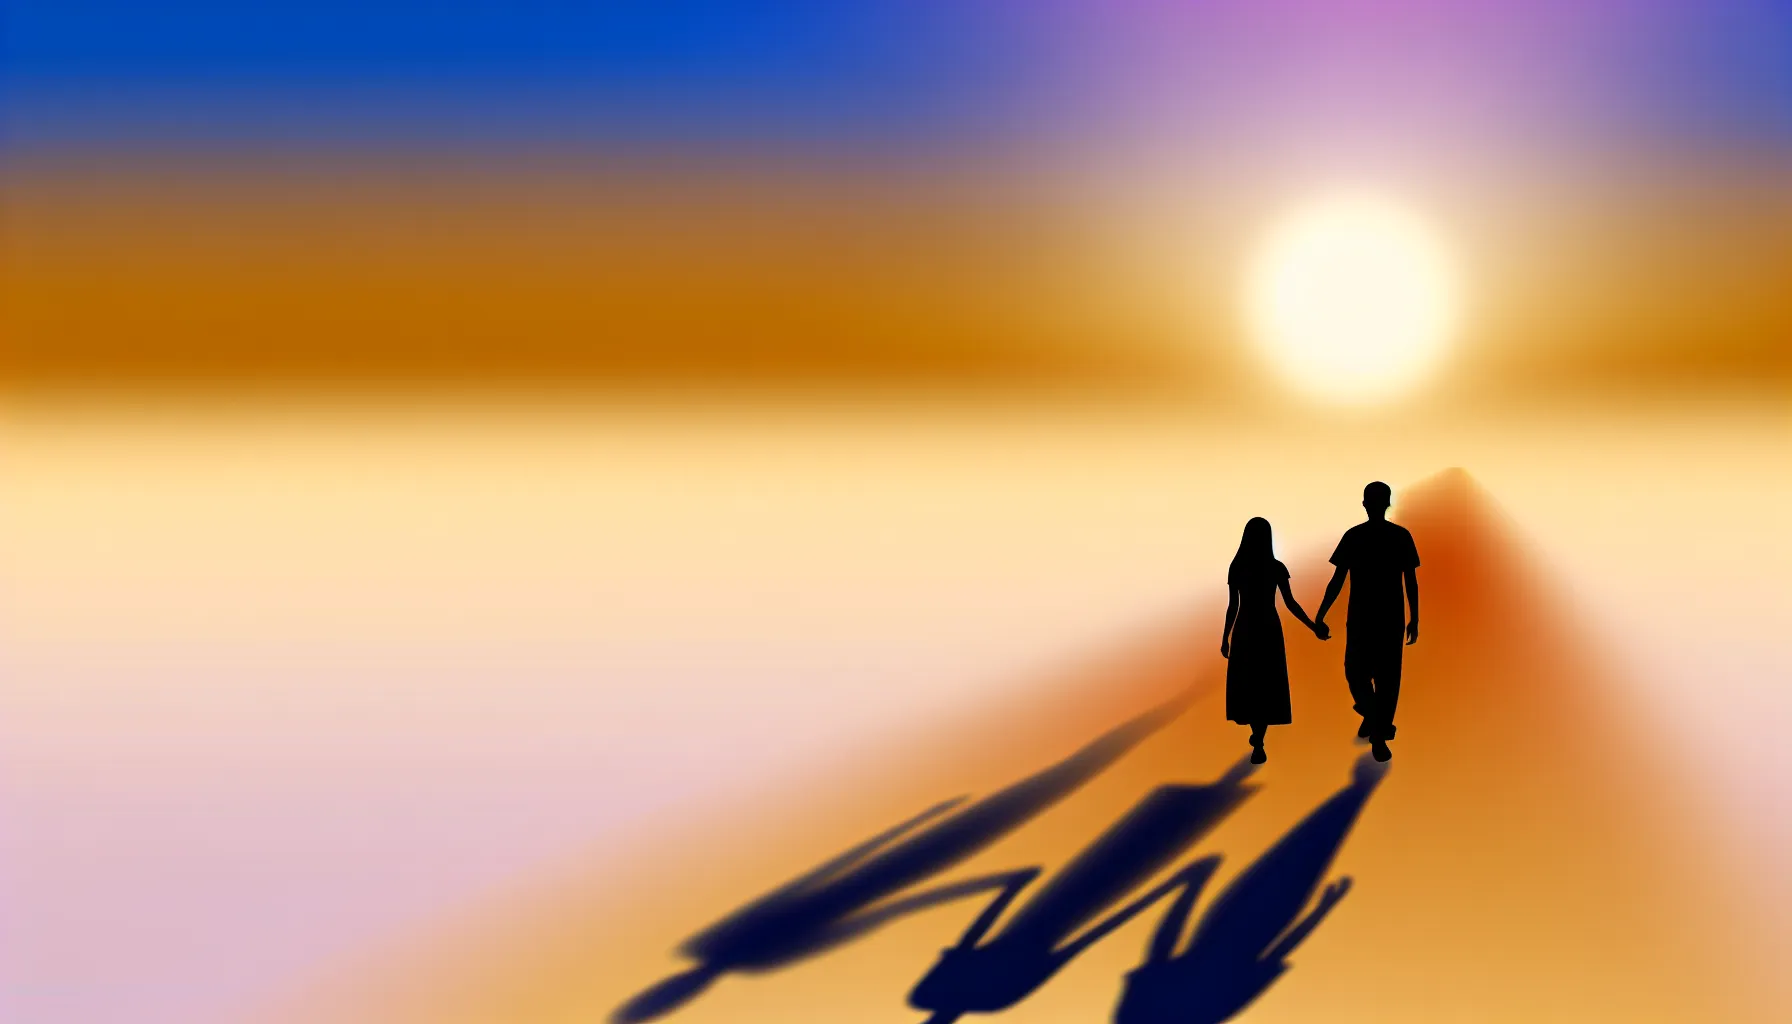 <strong>Together, they walk</strong>—not just on a path illuminated by the sun's farewell kiss but on a shared journey through life's tapestry, hand-in-hand, their connection a silhouette against the canvas of time.